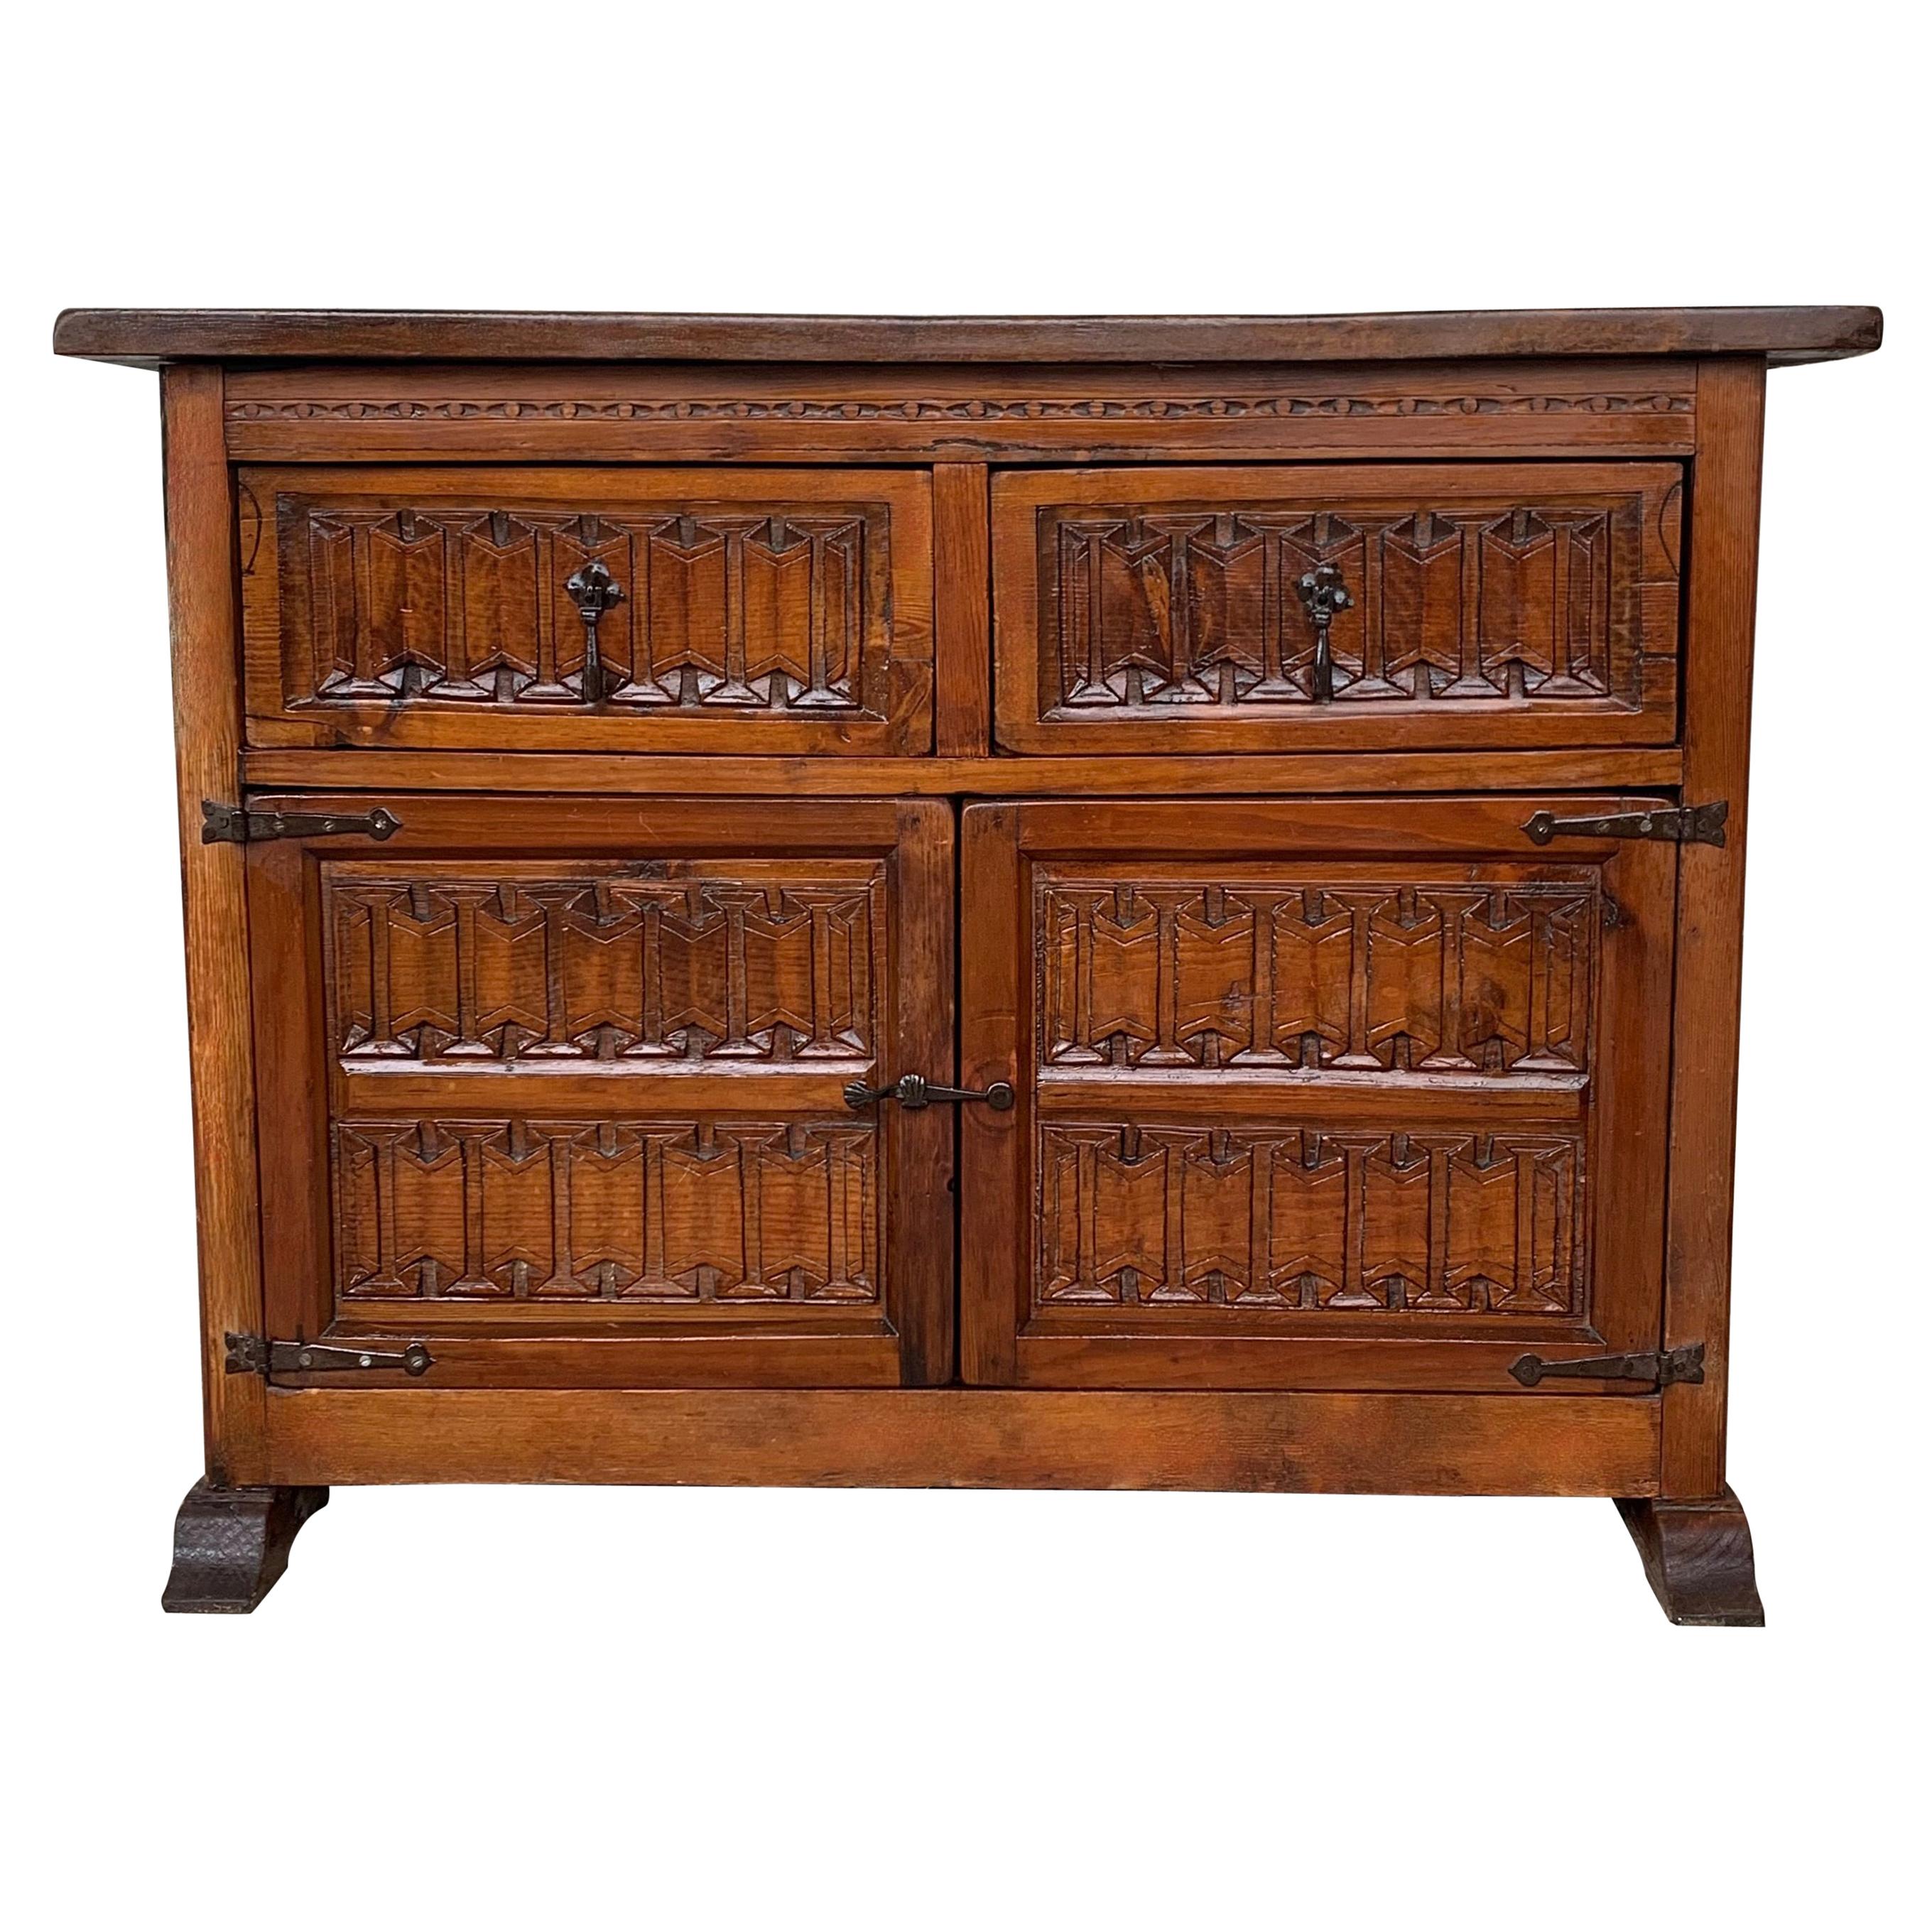 19th Century Northern Spanish Carved Pine Console Sofa Table, Two Drawers